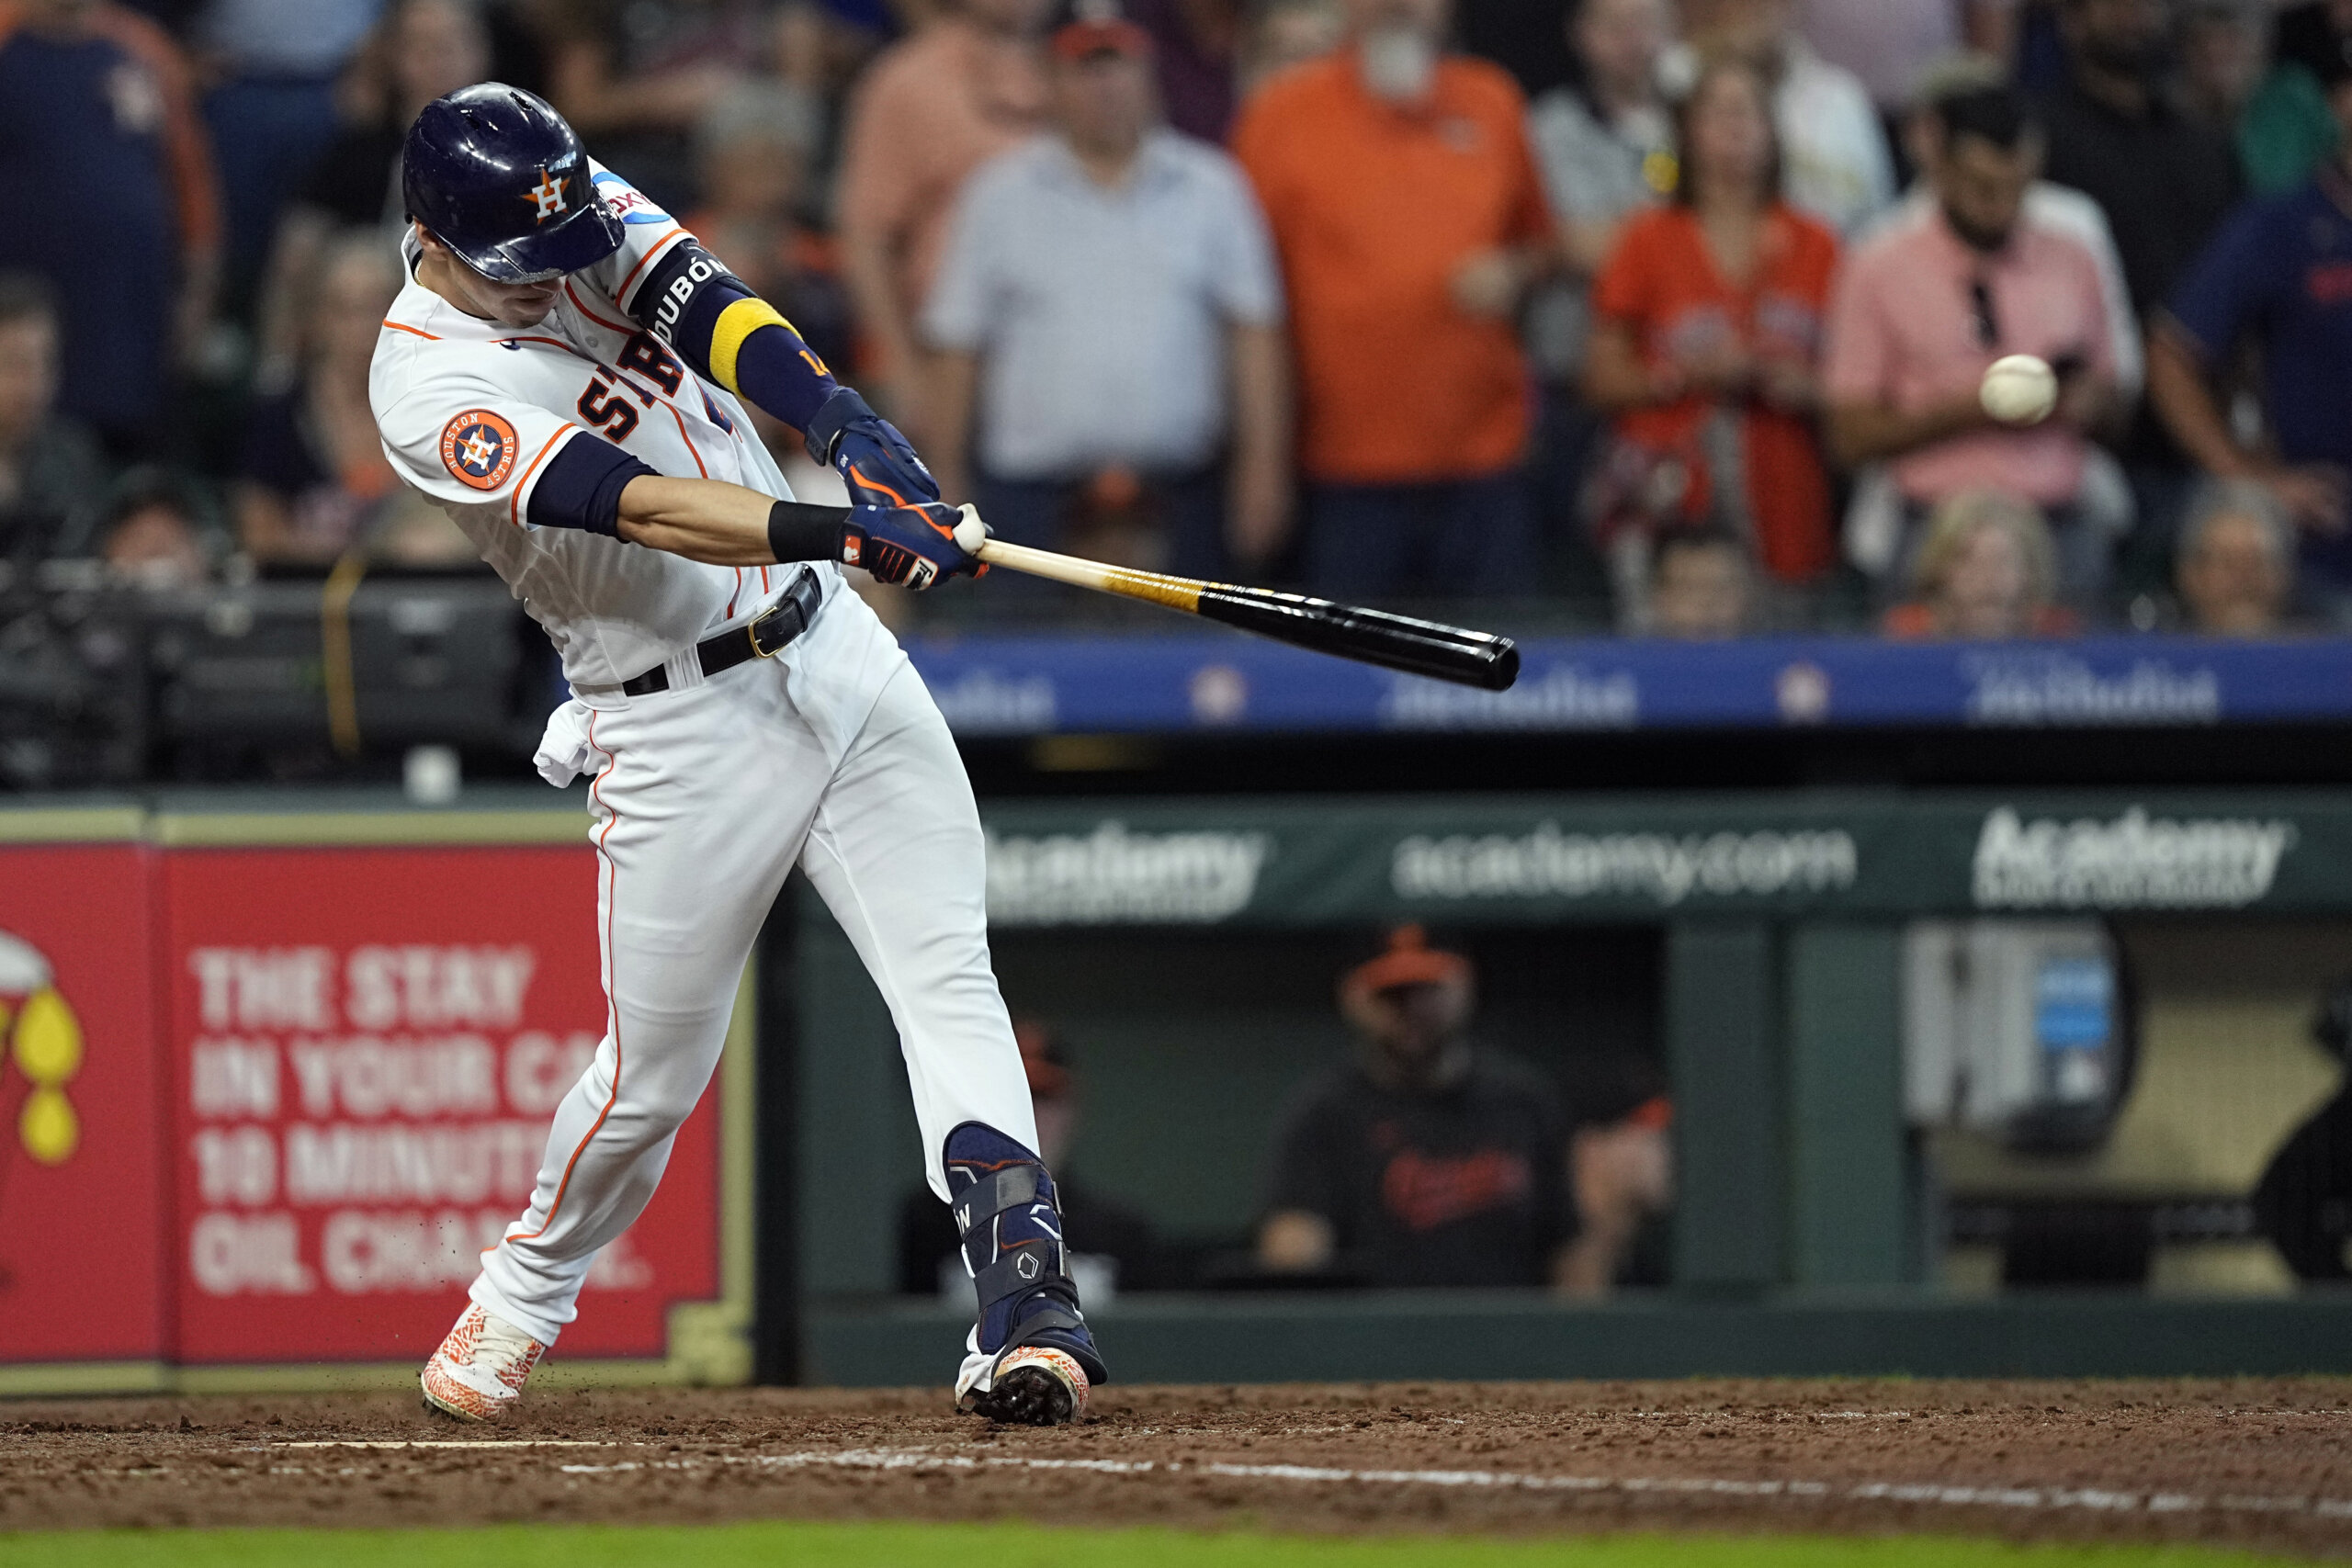 Houston Astros Tie MLB Record, Hit Five Home Runs in One Inning on Tuesday  - Fastball